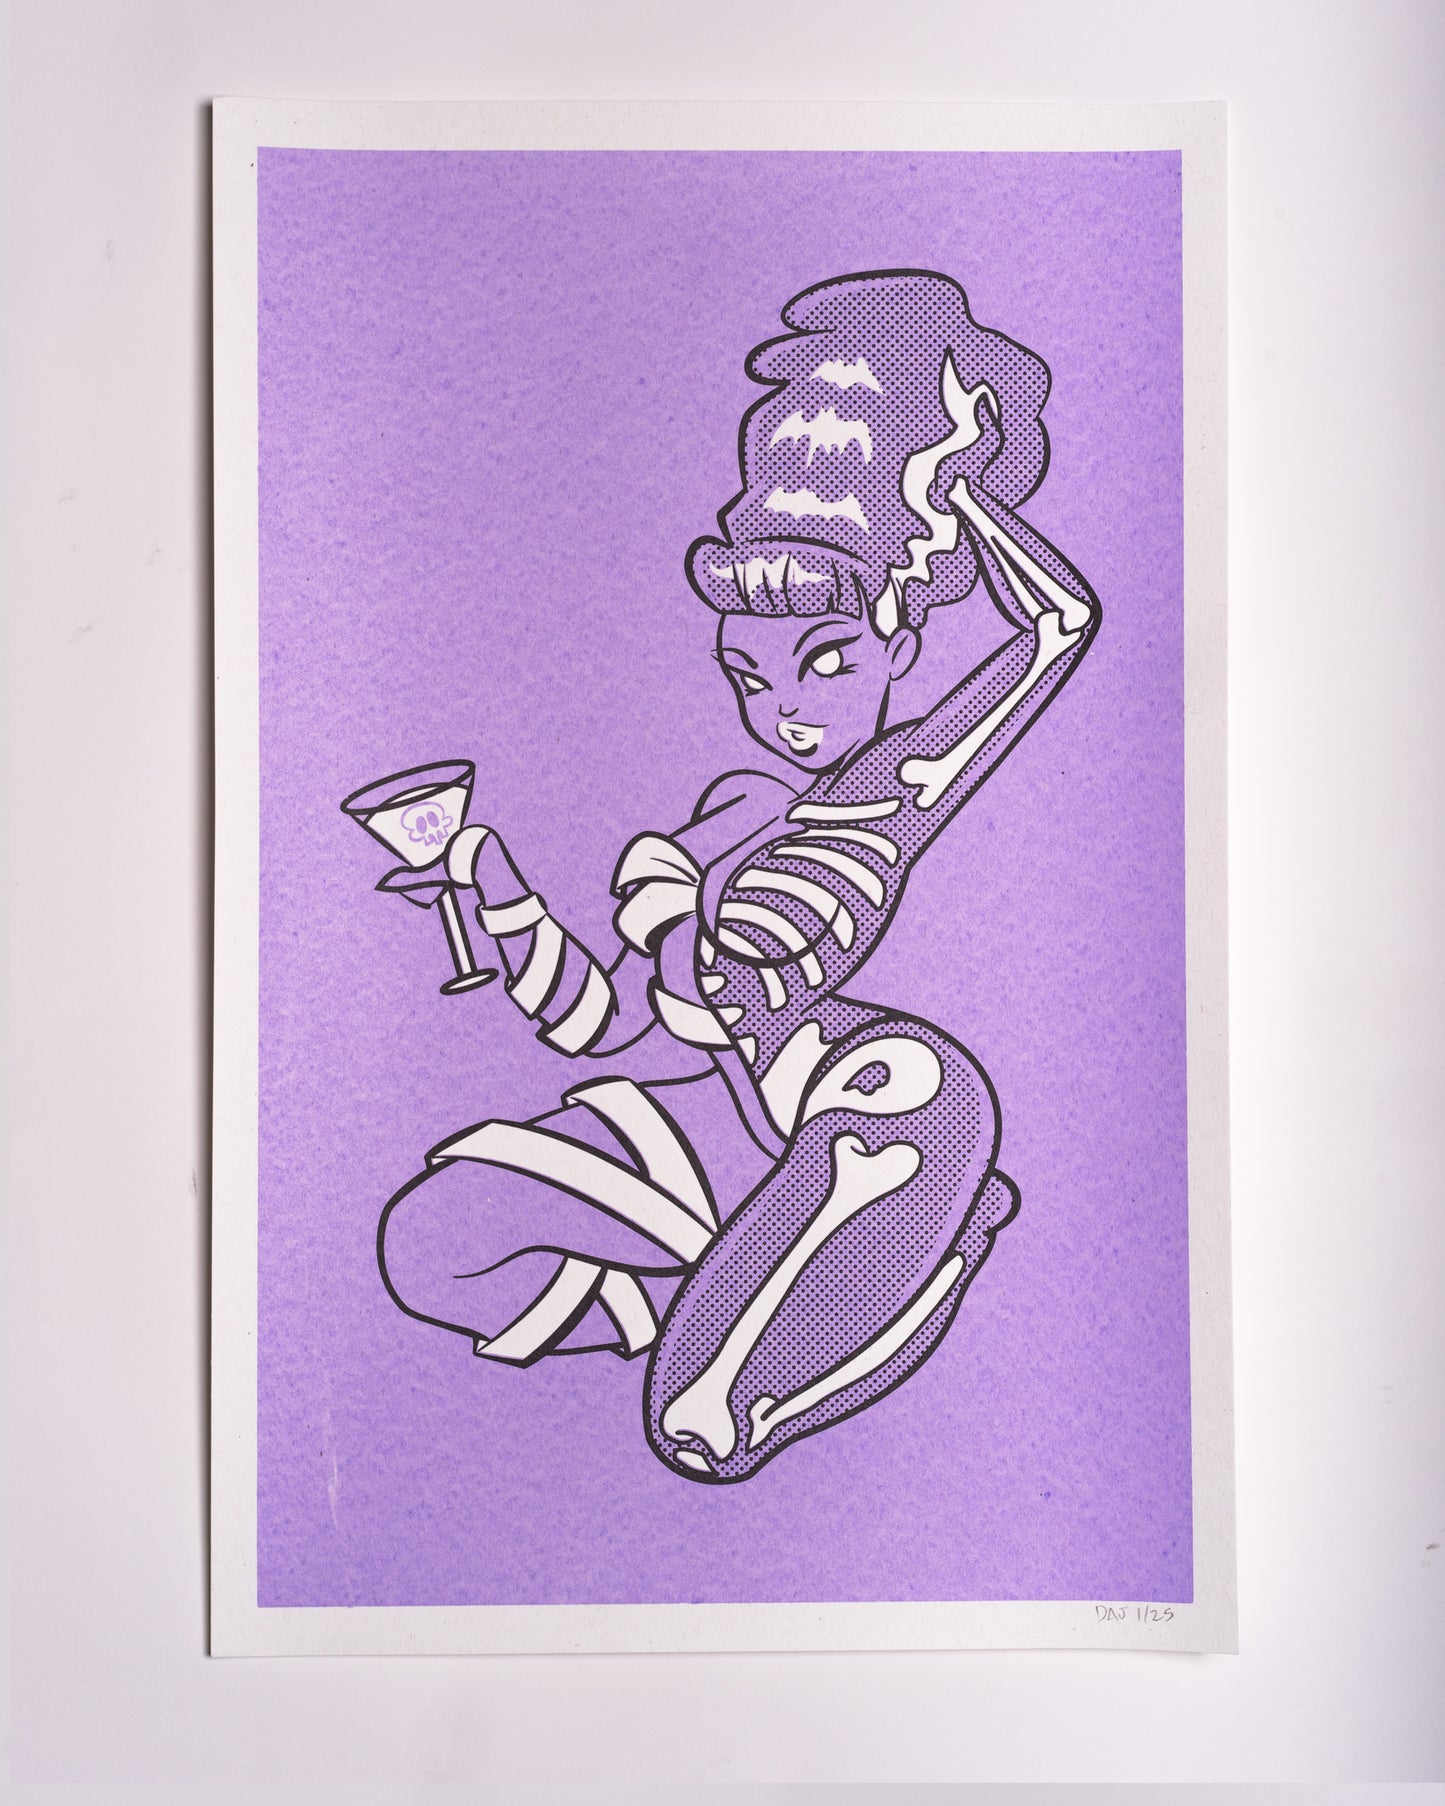 BRIDE BONES© GHOULISH PURPLE SCREEN PRINTED POSTER 12.5 x 19 inches